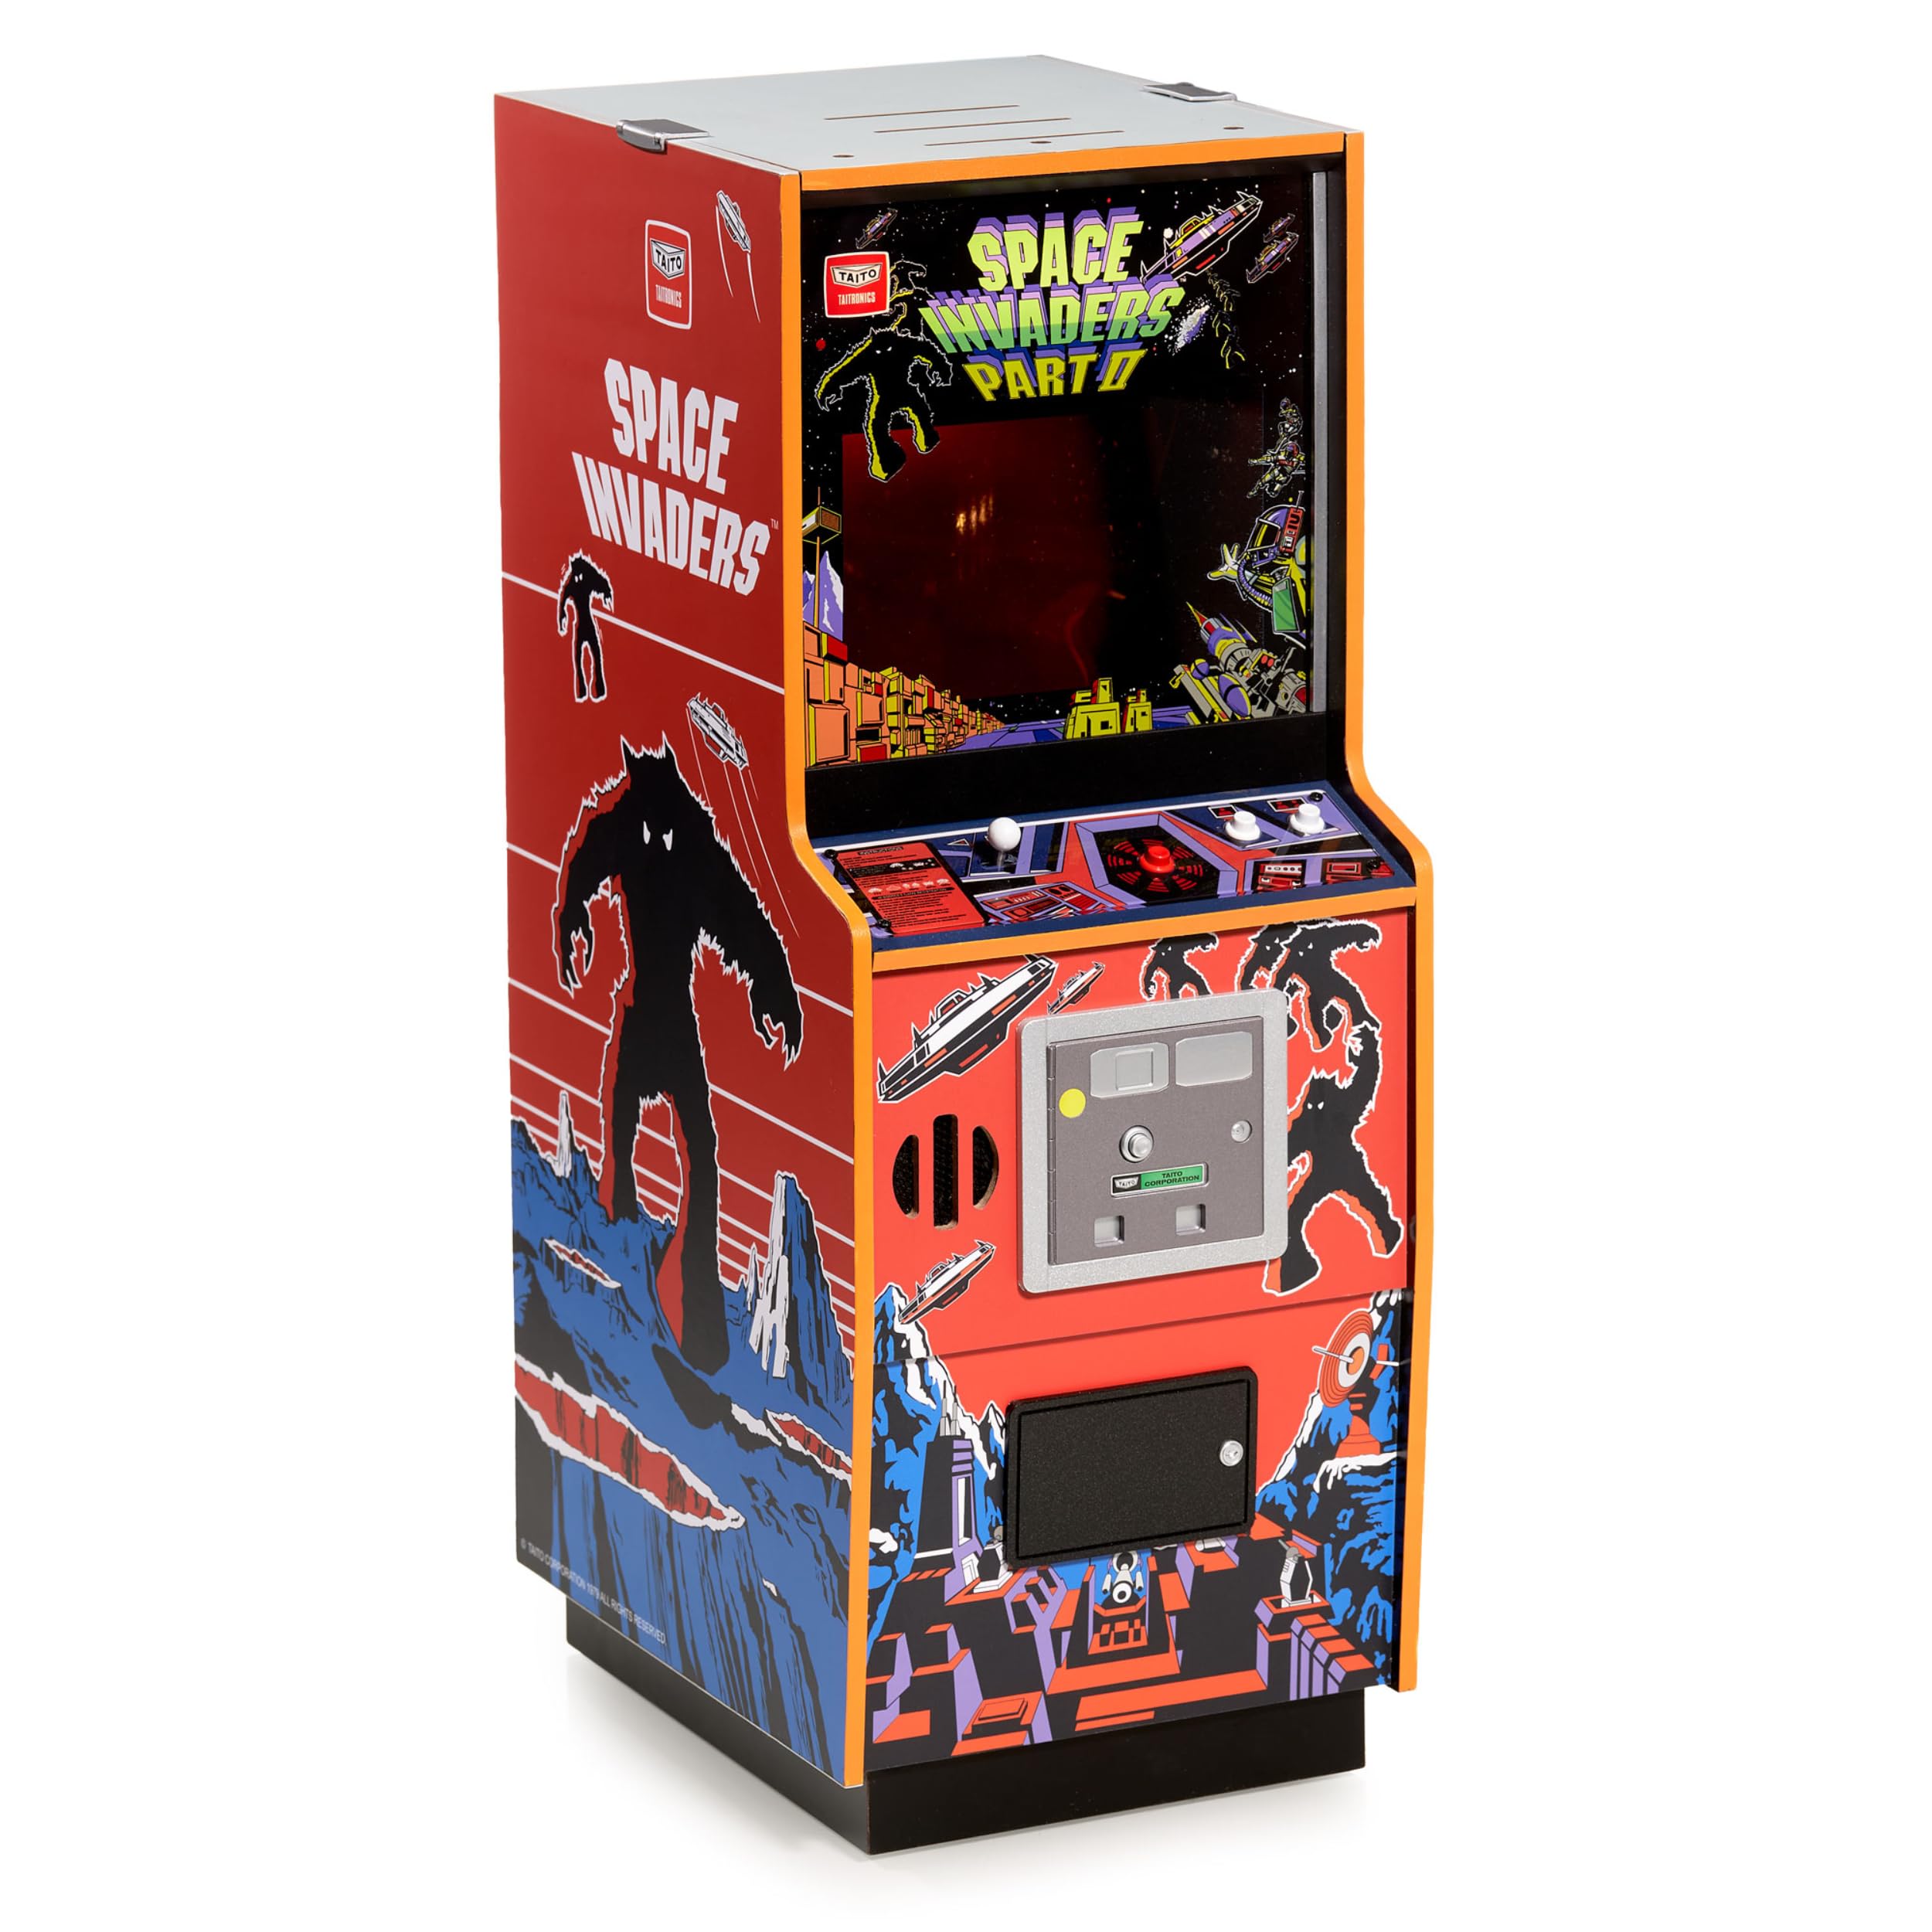 Quarter Arcades Official Space Invaders II 1/4 Sized Mini Arcade Cabinet by Numskull – Playable Replica Retro Arcade Game Machine – Micro Retro Console